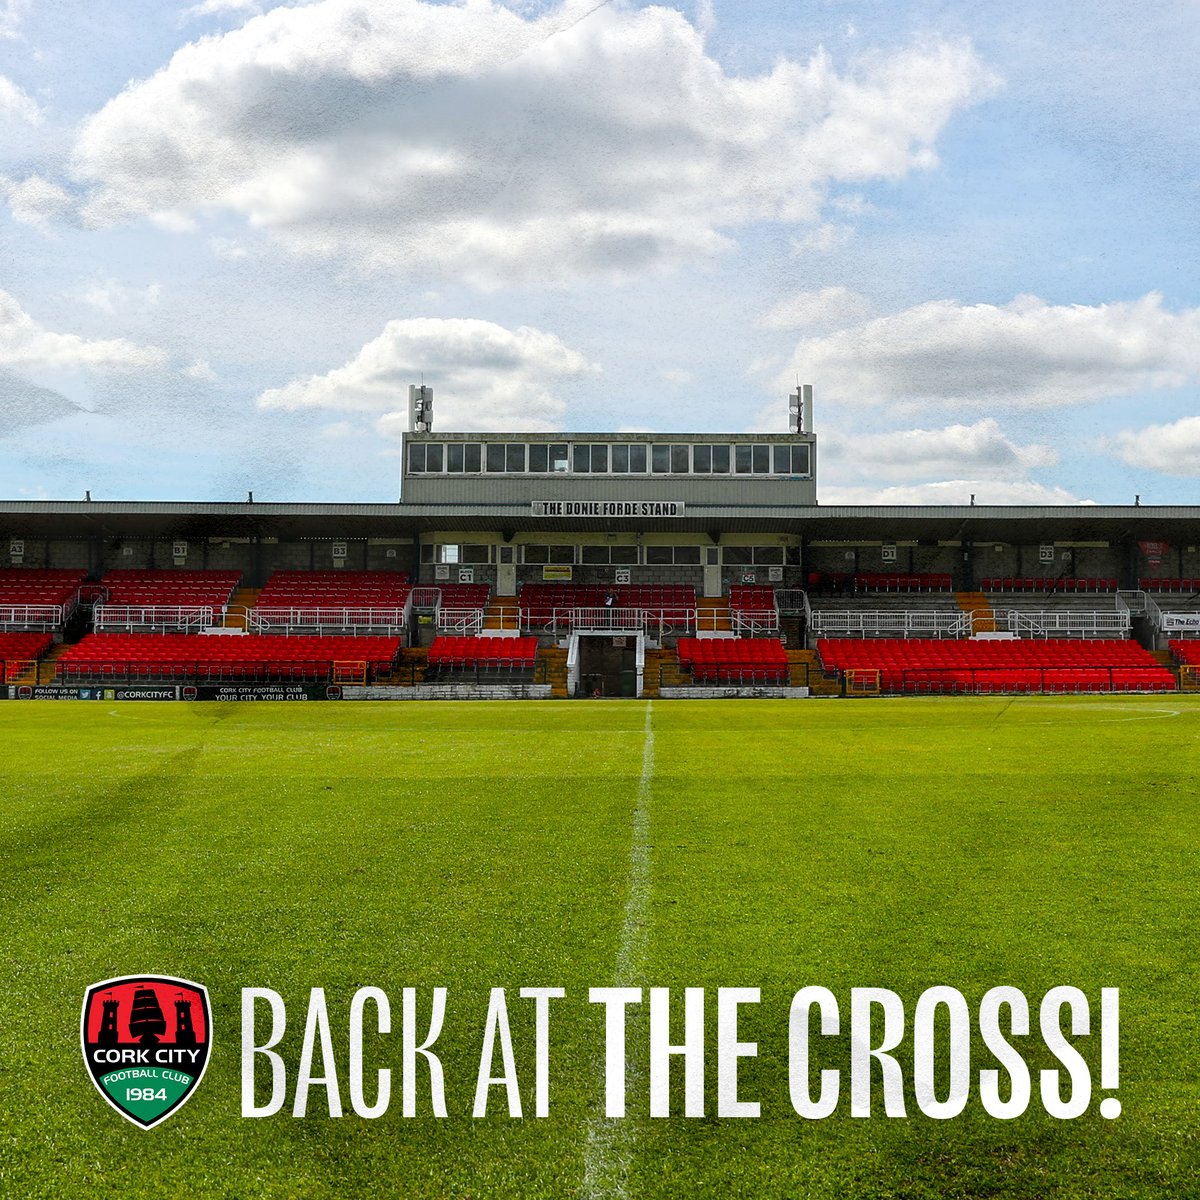 The club is pleased to have been advised that Turner’s Cross will reopen on Wednesday 1 May, following recent works to the pitch. This means that our first game back will be our Women’s game against Treaty United, live on @SportTG4 👇🏼 corkcityfc.ie/blogs/news/tur… #CCFC84 || #LOI